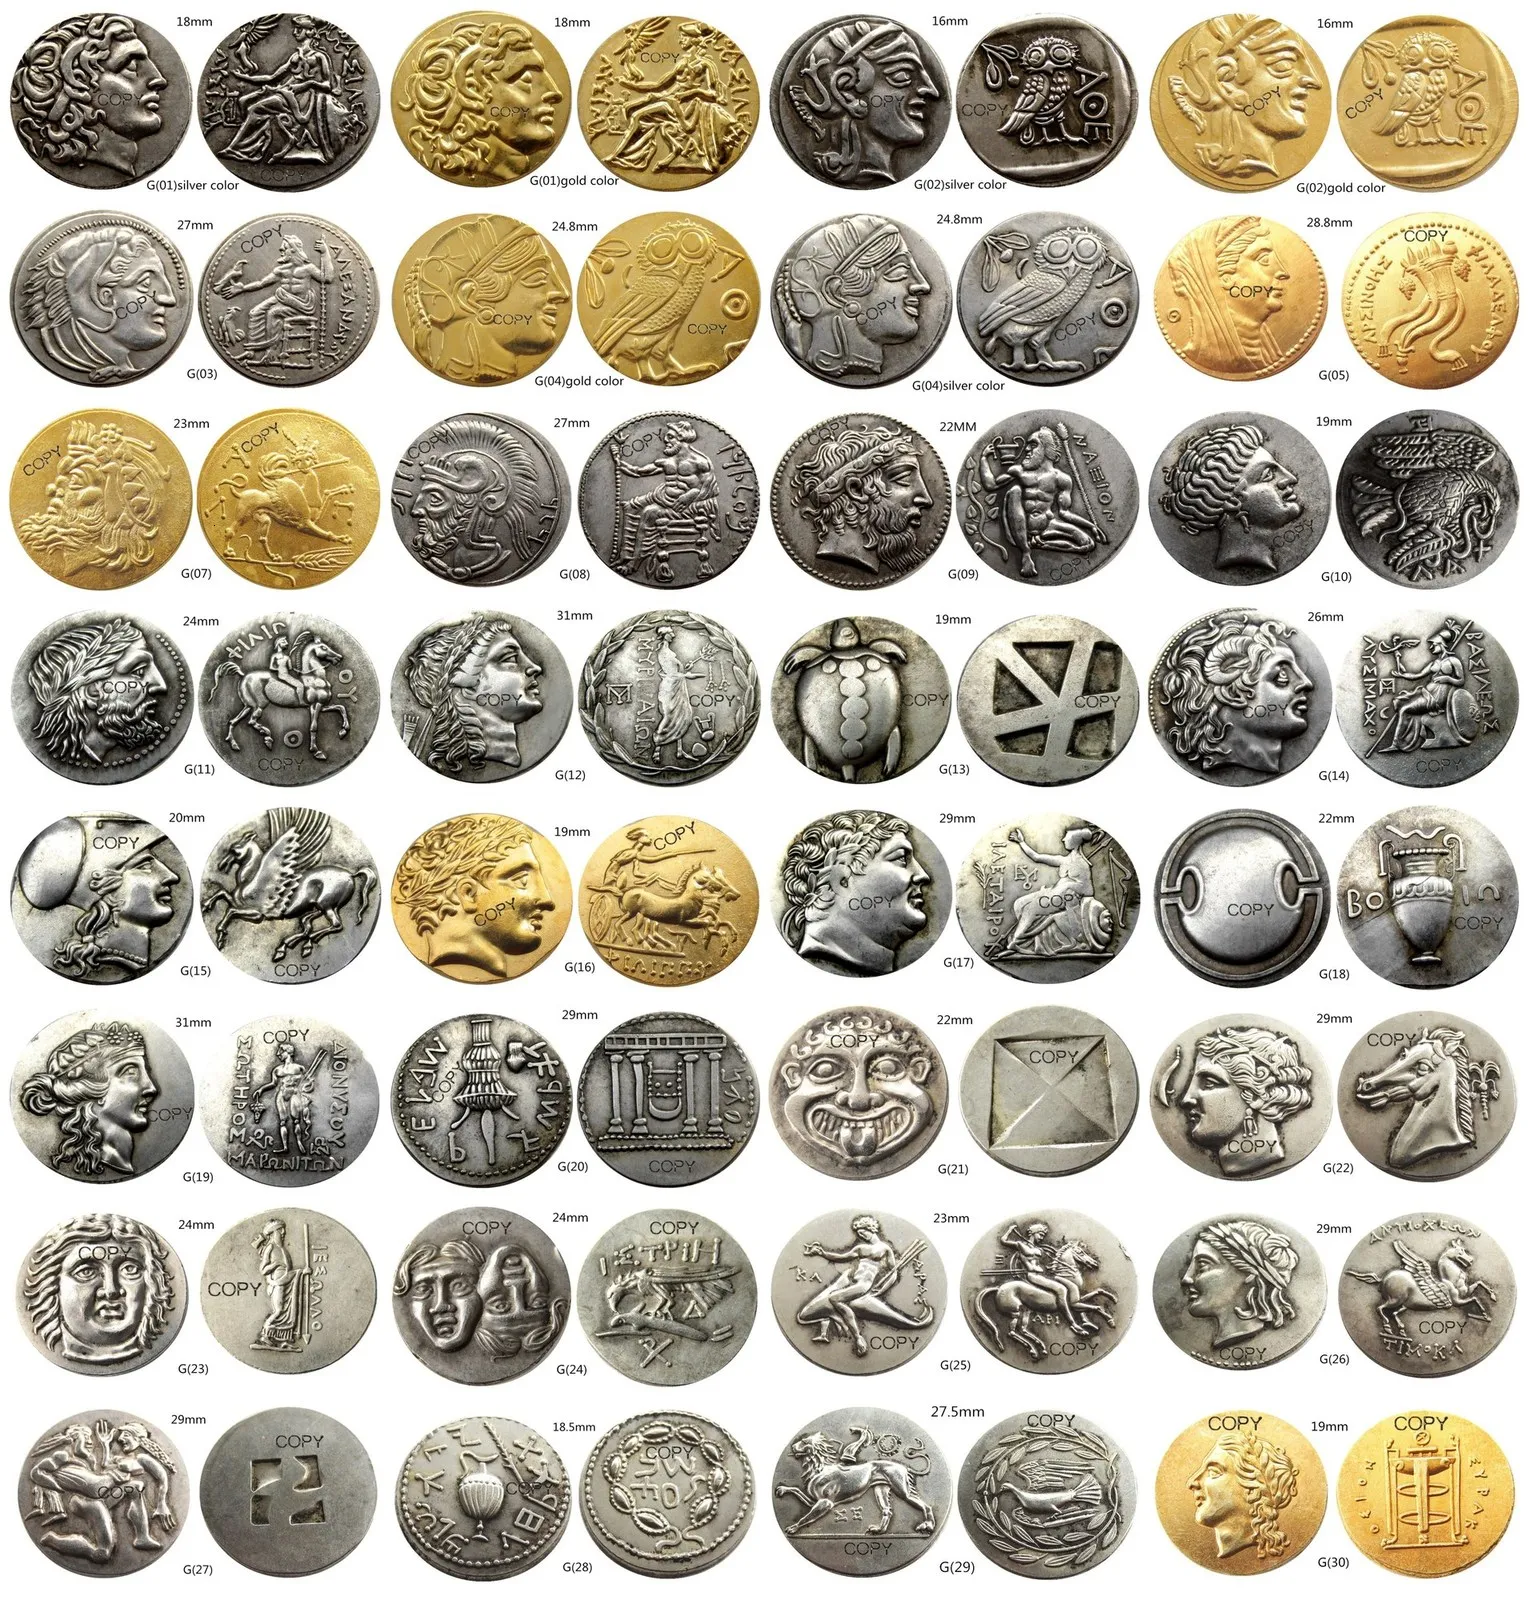 Decorative Objects Figurines Greek And Roman Ancient Mix SilverGold Plated copy coins 230701